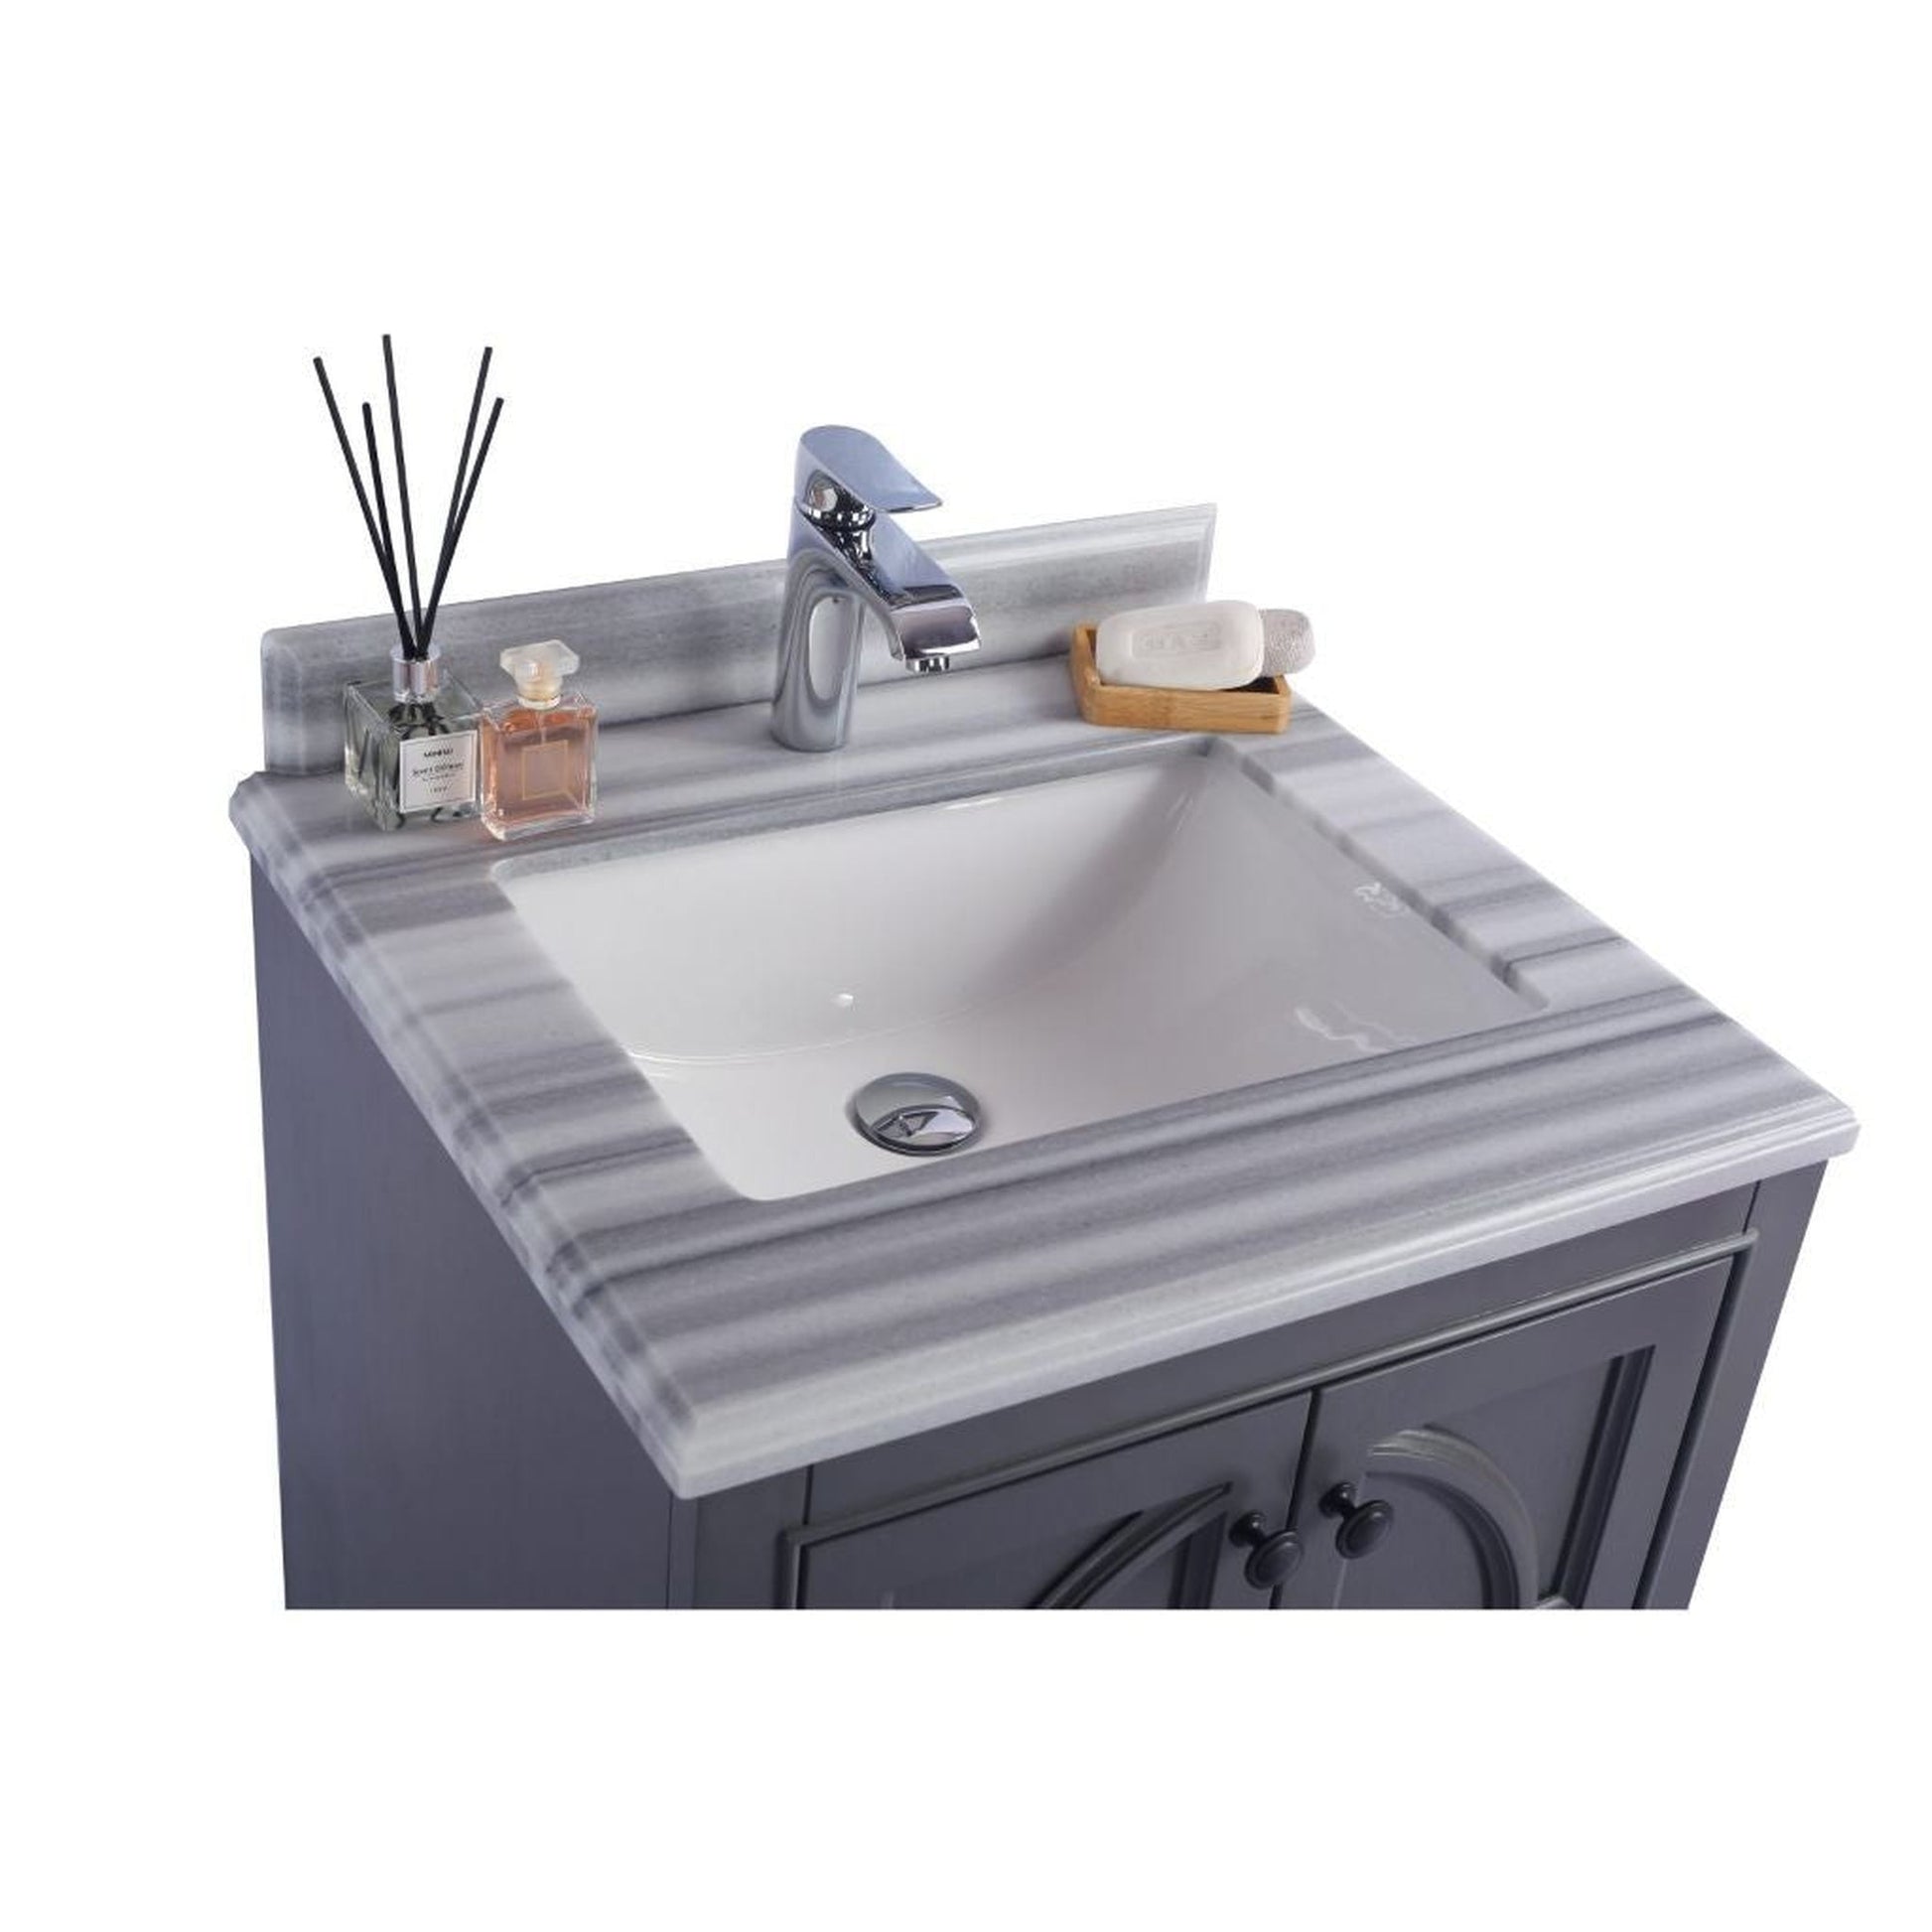 Laviva Odyssey 24" Maple Gray Vanity Base and White Stripes Marble Countertop With Rectangular Ceramic Sink